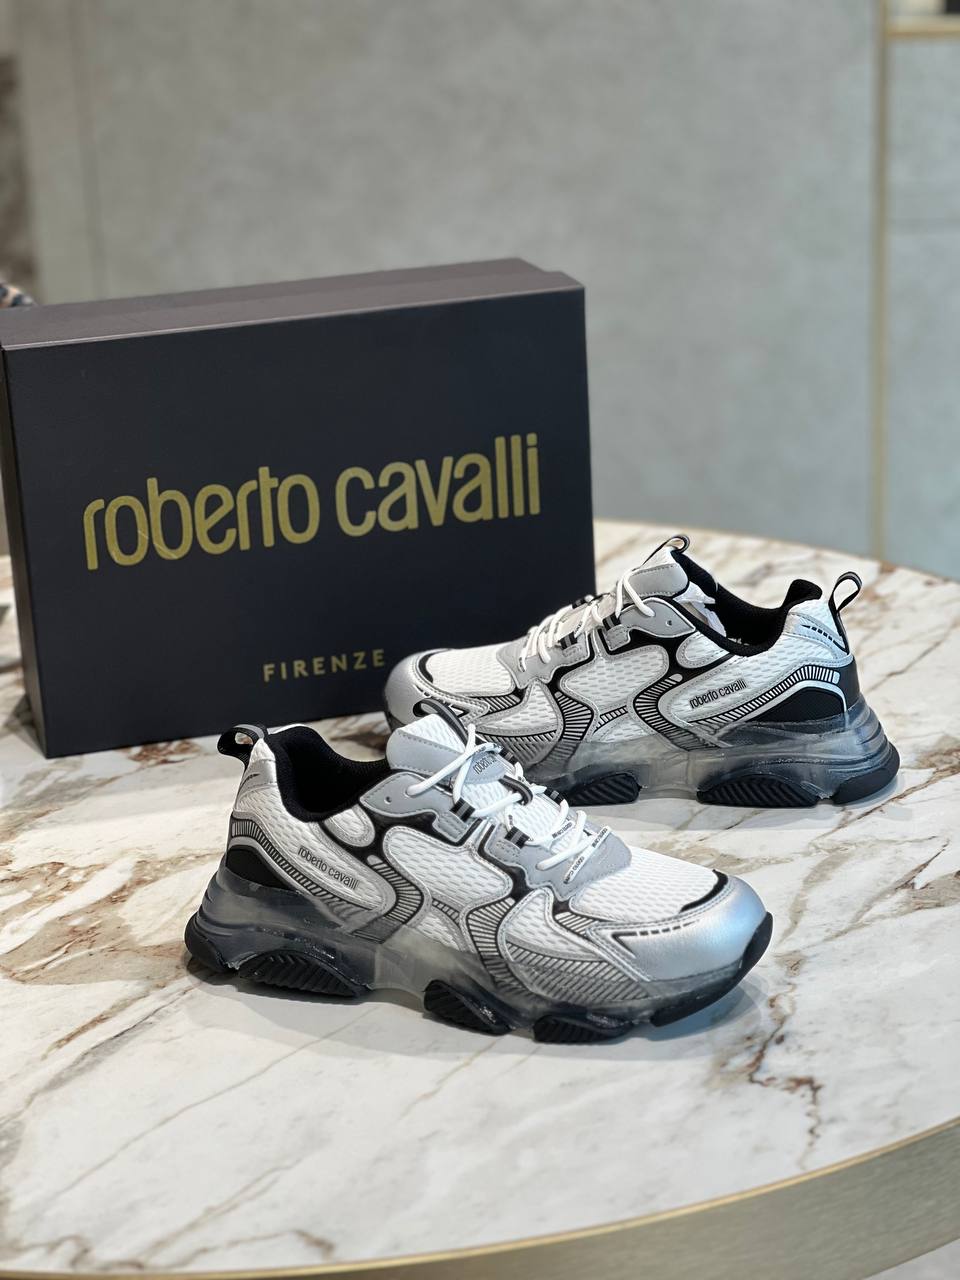 Roberto Cavalli Outlets 5945